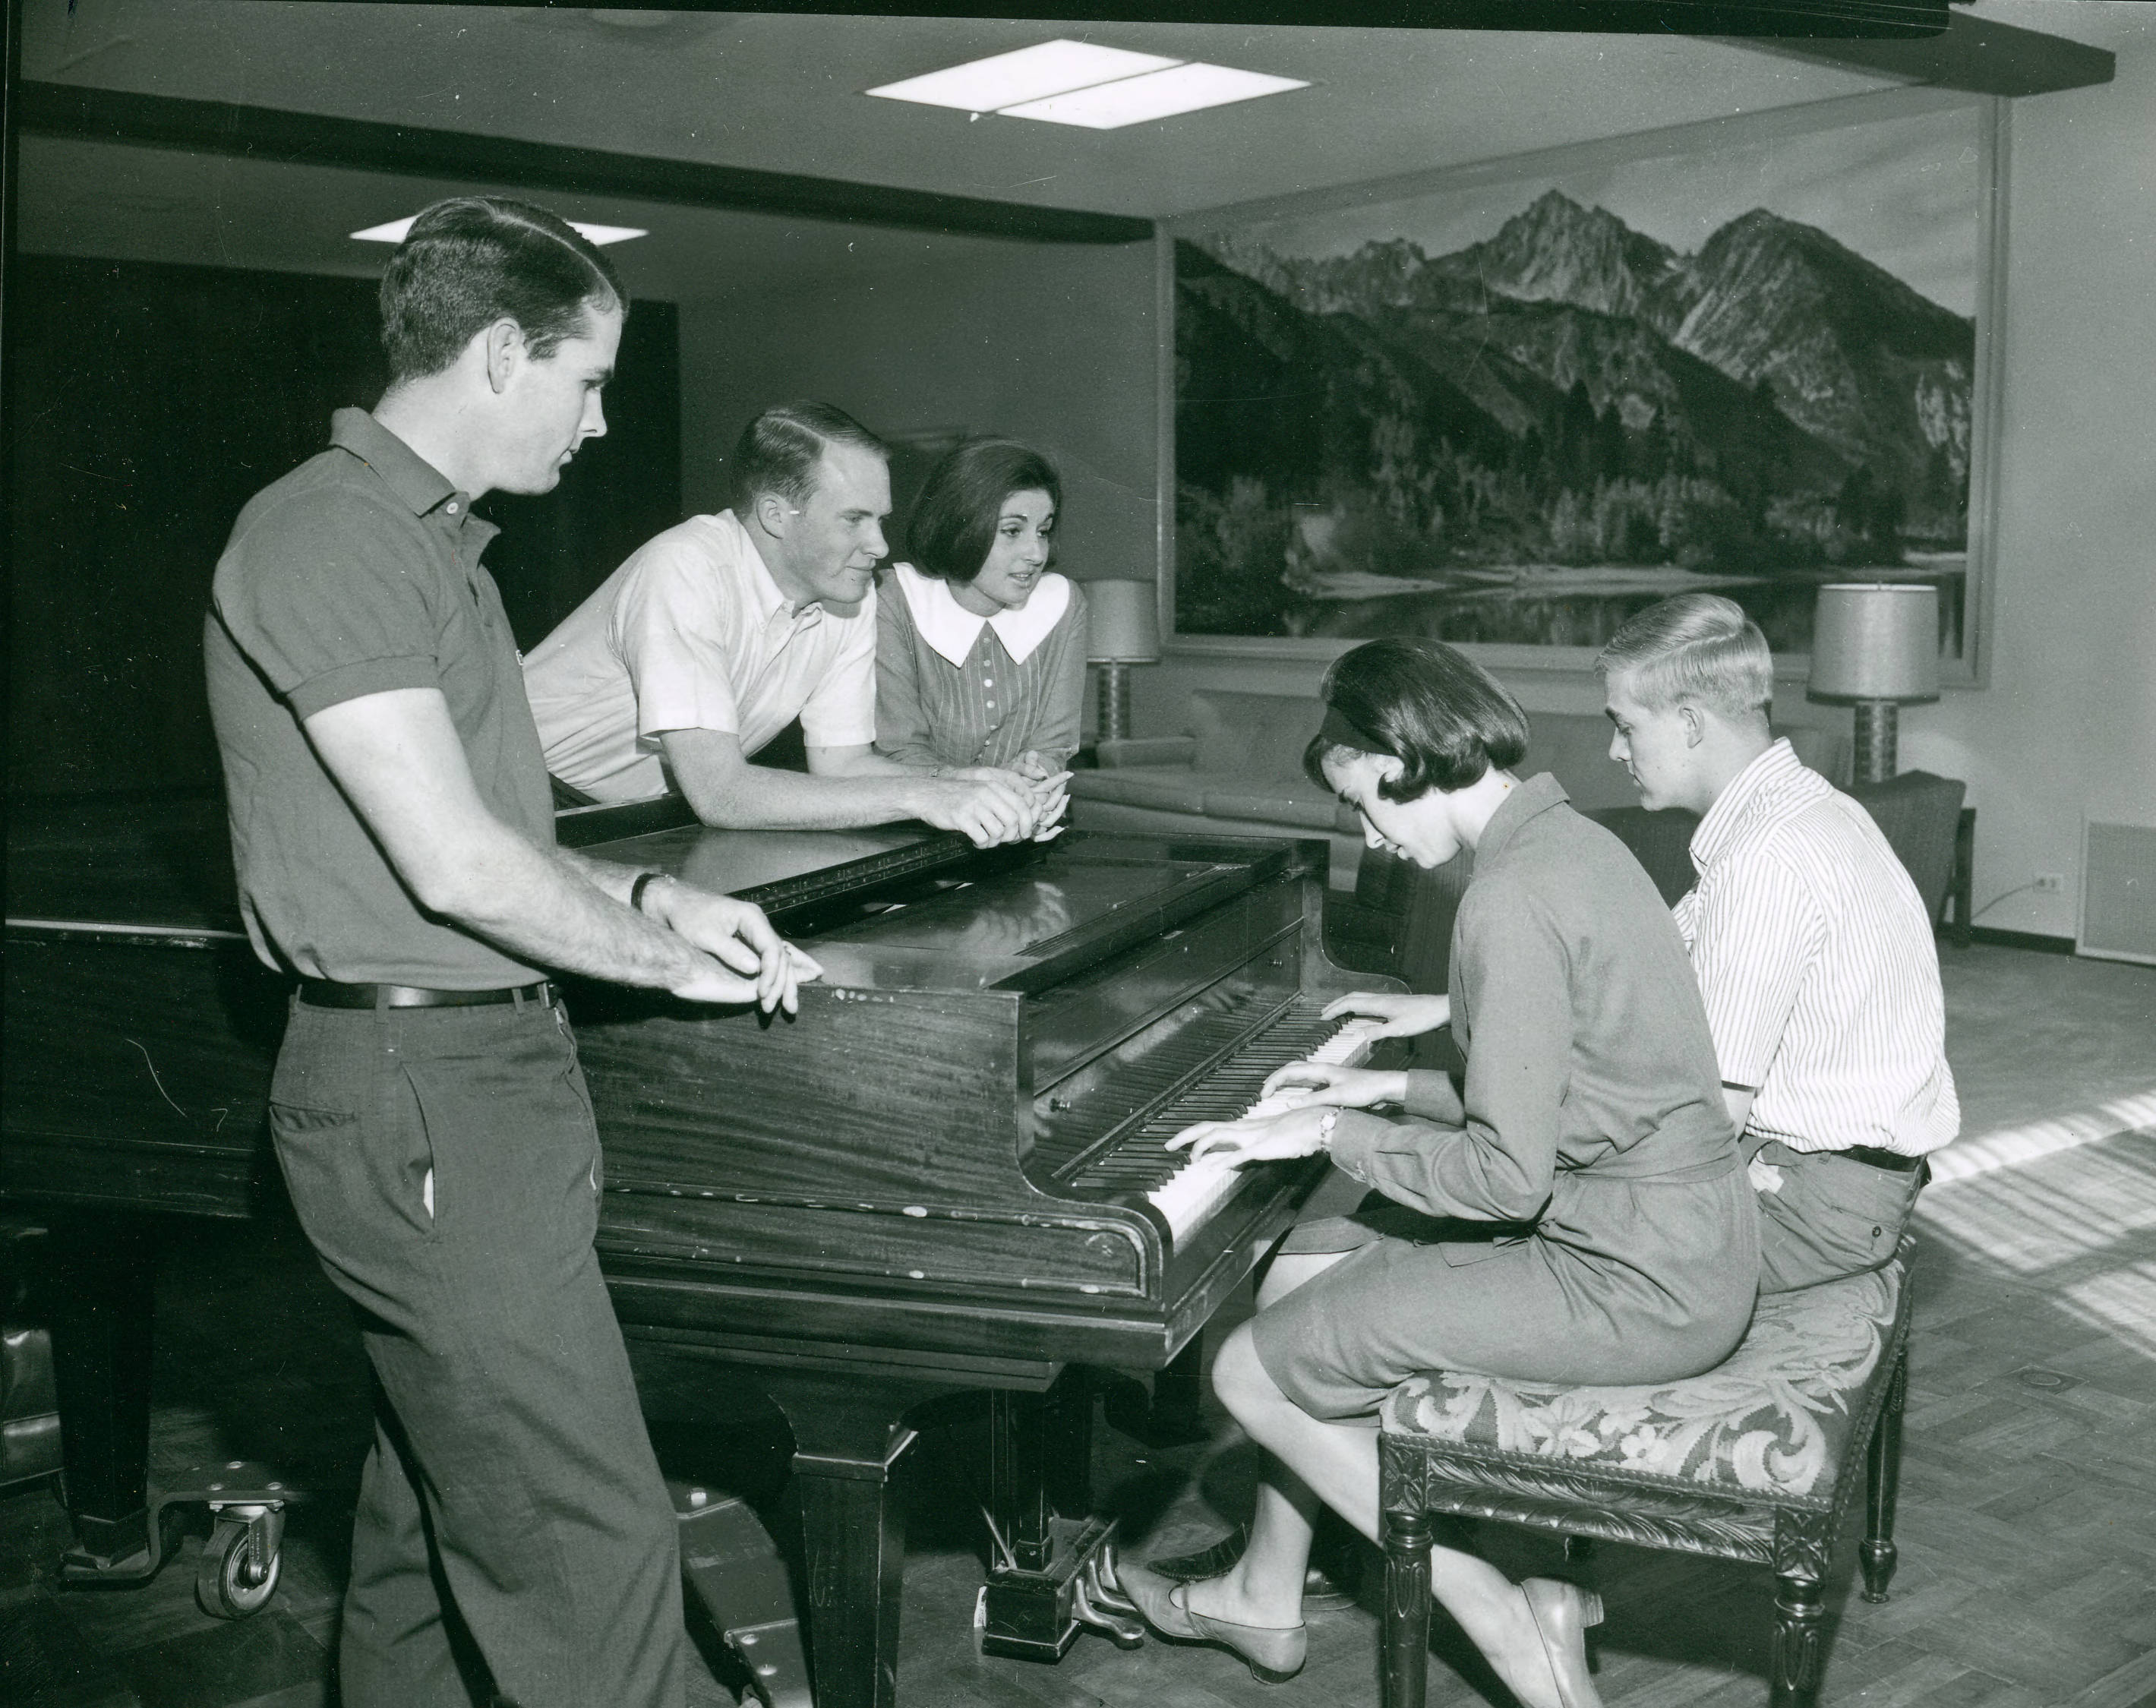 Black and white photo of Robert Day and friends gathered around a piano where two people are seated and playing.